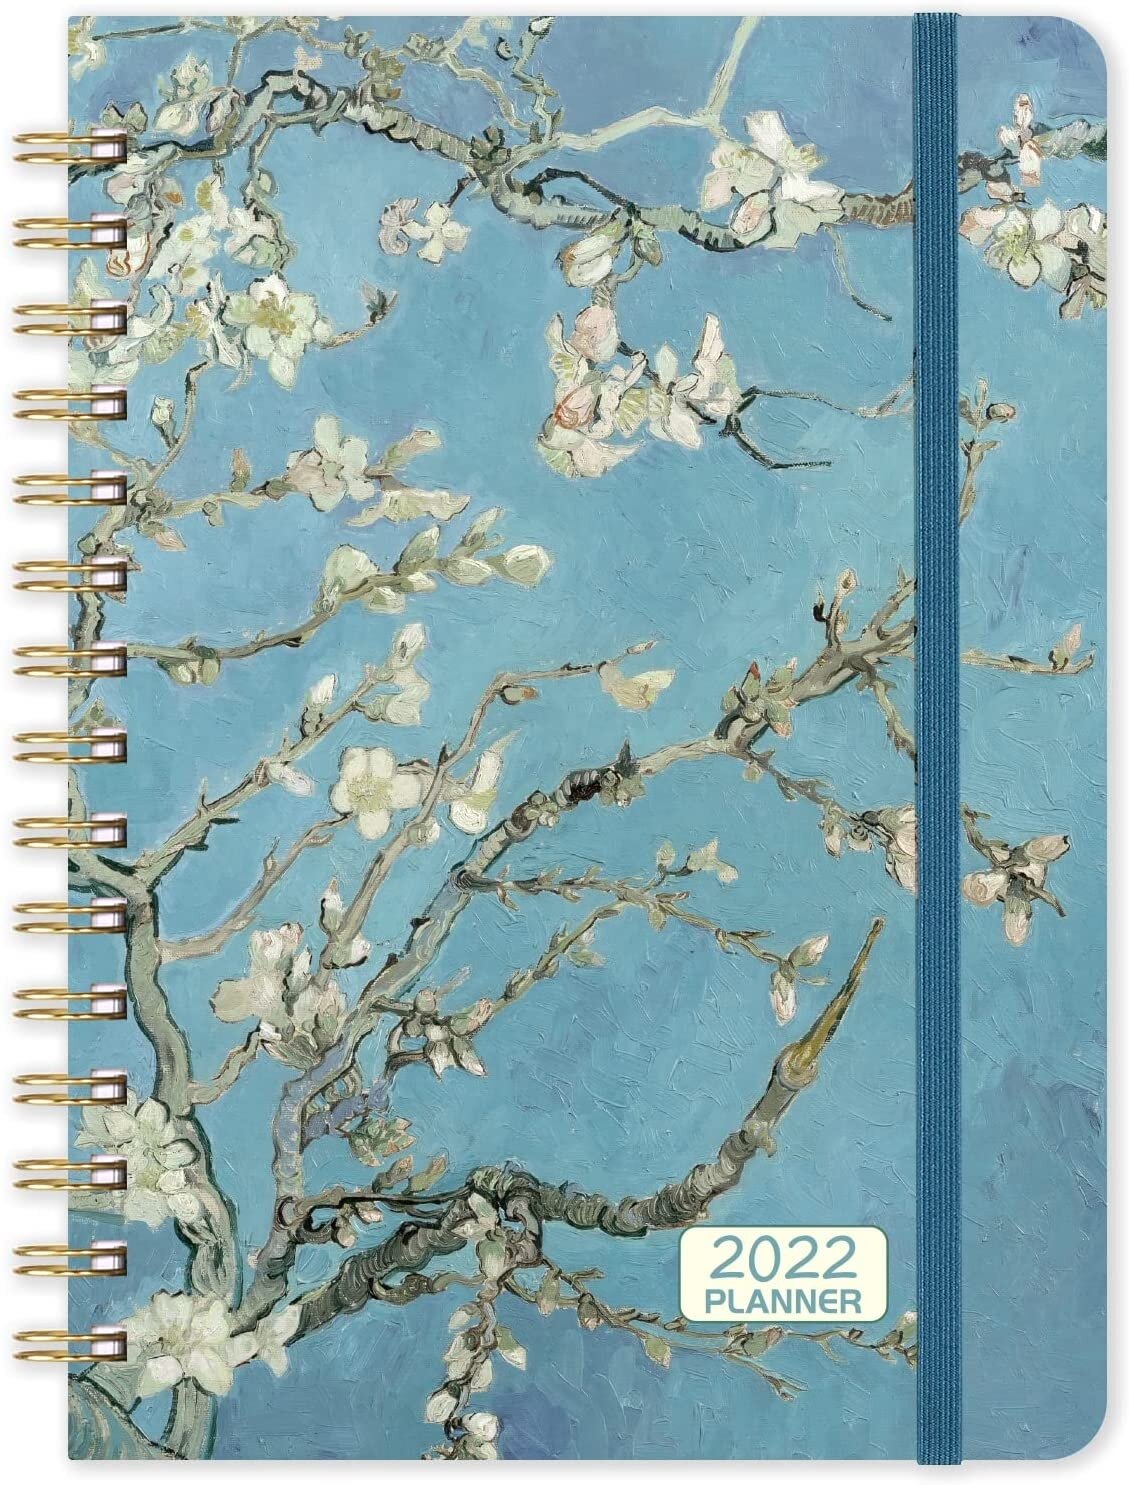 2022 Planner Weekly & Monthly Planner 2022 with Twin-wire Binding Jan 2022 ...